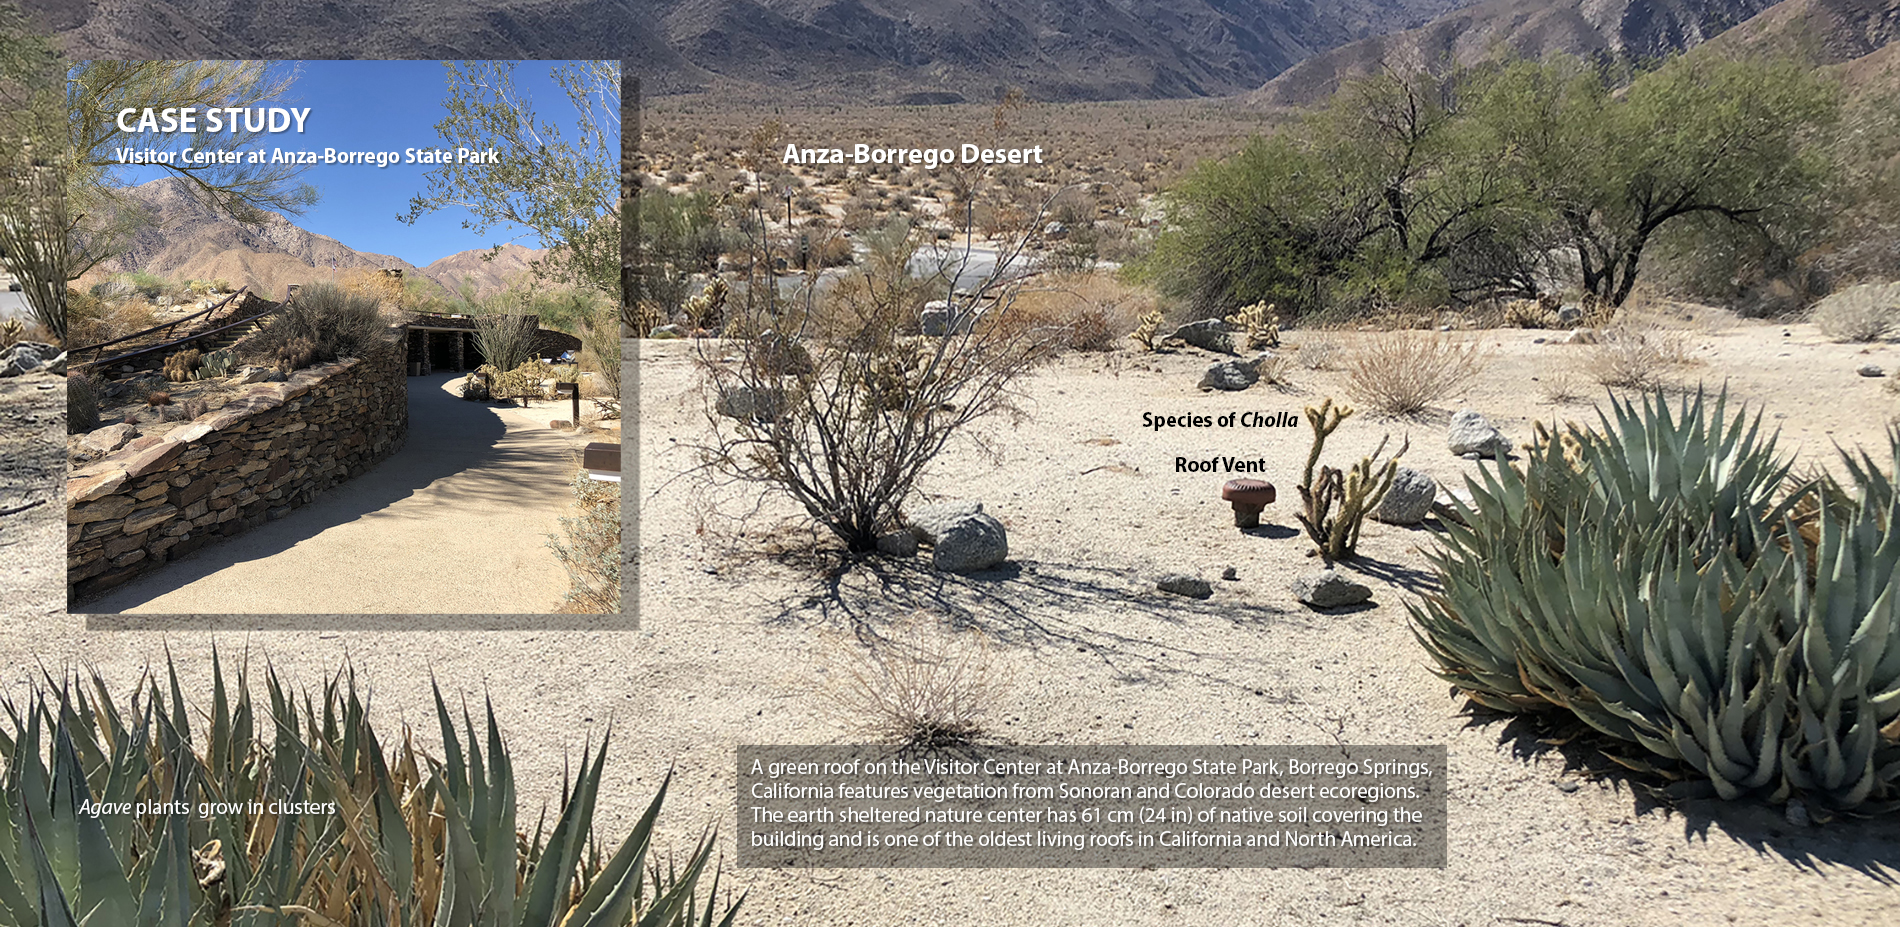 Ecoregional Green Roof in the Anza-Borrego Desert (Chapter 5)